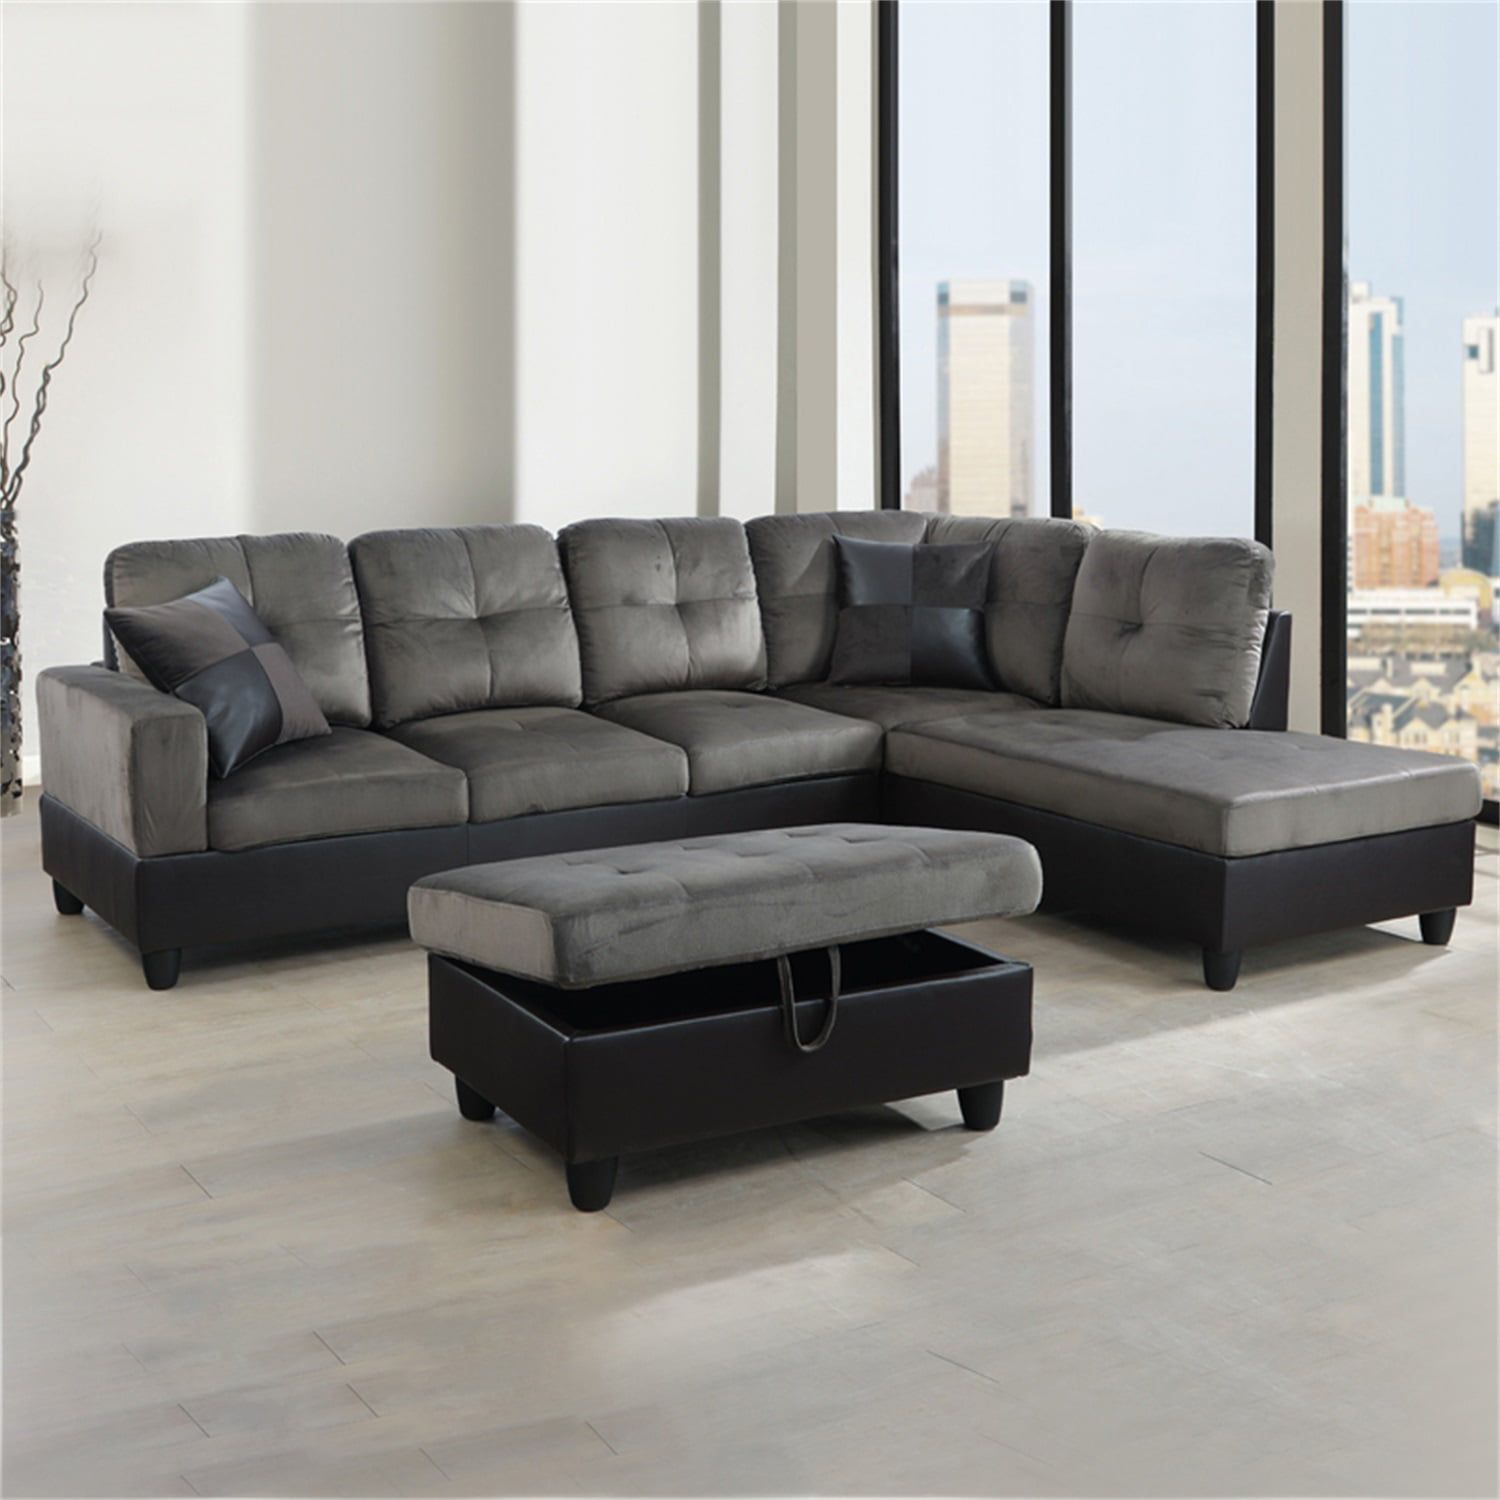 Hommoo Sectional Sofa, Free Combination Sectional Couch, Small L Shaped Sectional  Sofa, Modern Sofa Set For Living Room, Taupe(without Ottoman) – Walmart Throughout Free Combination Sectional Couches (Gallery 1 of 20)